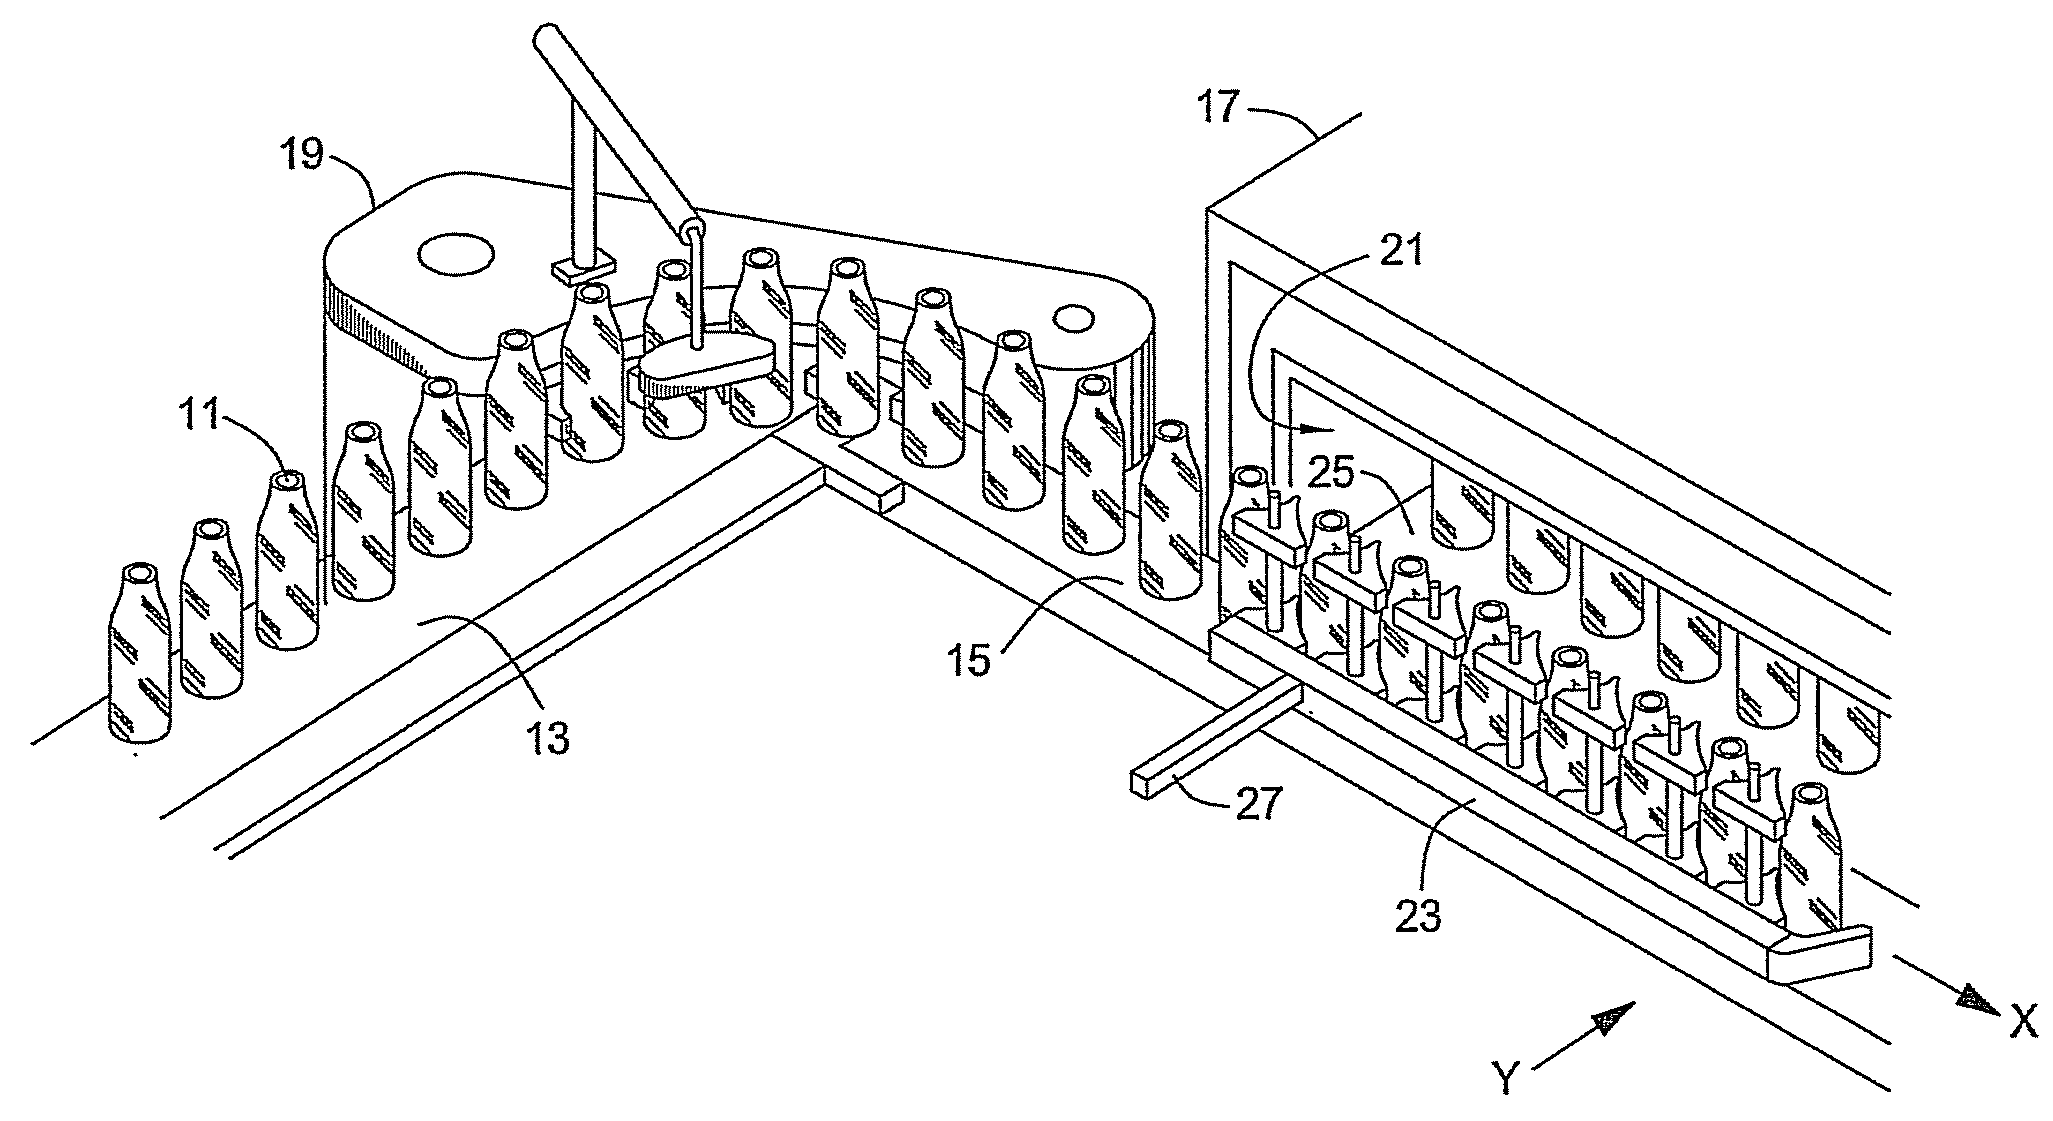 System, method, and apparatus for adjustable stacker bar assembly having vertical accommodation features